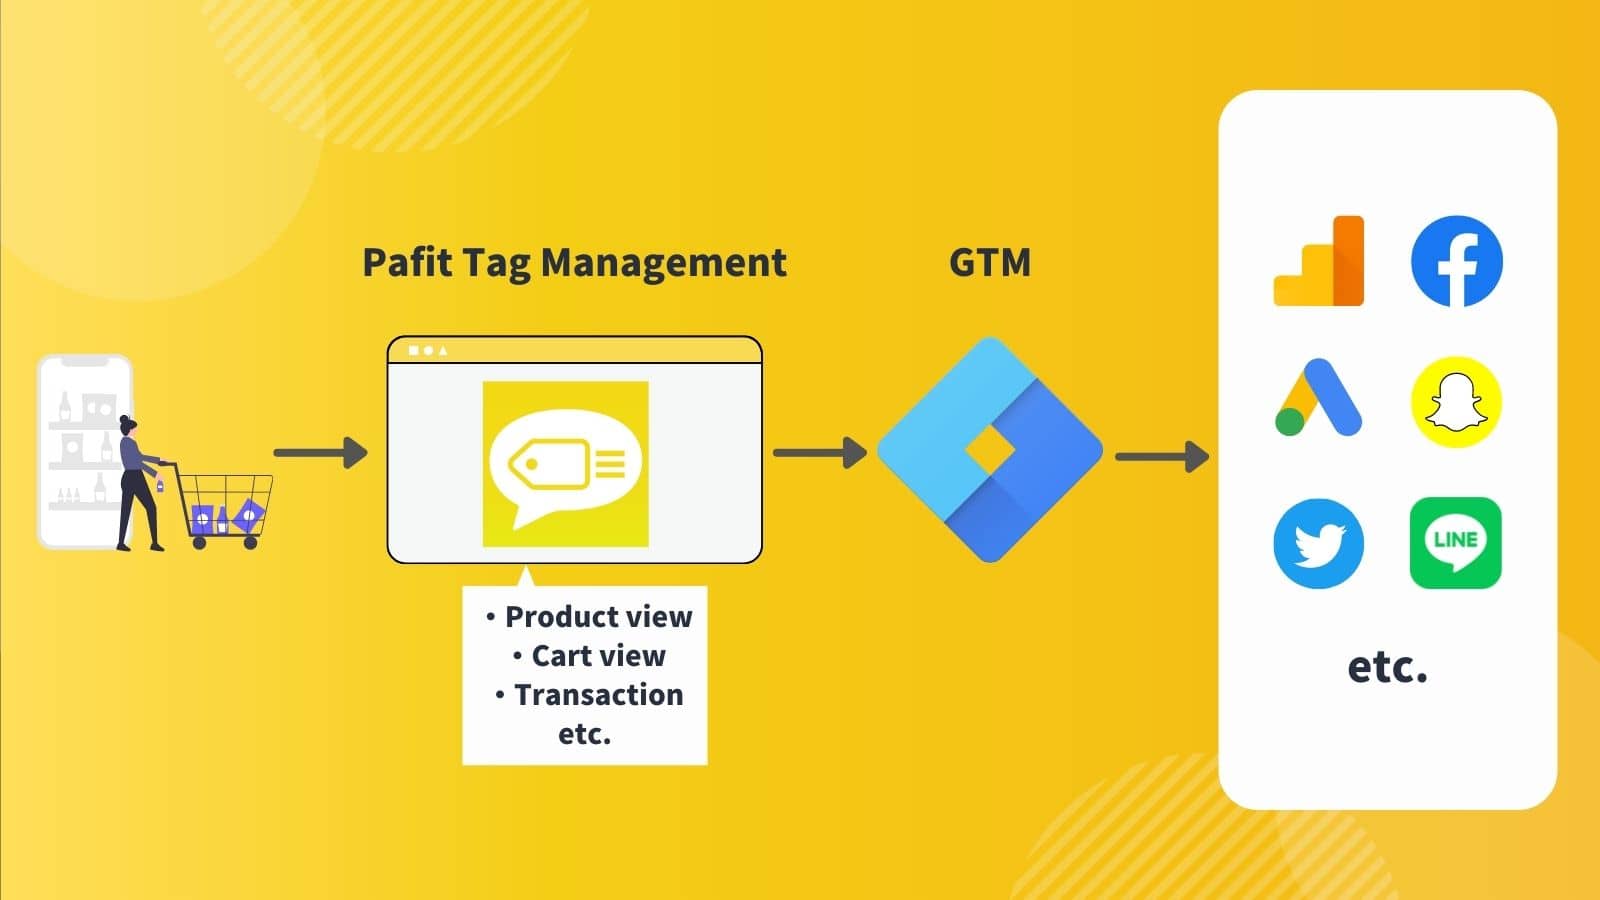 Pafit Tag Management for GTM